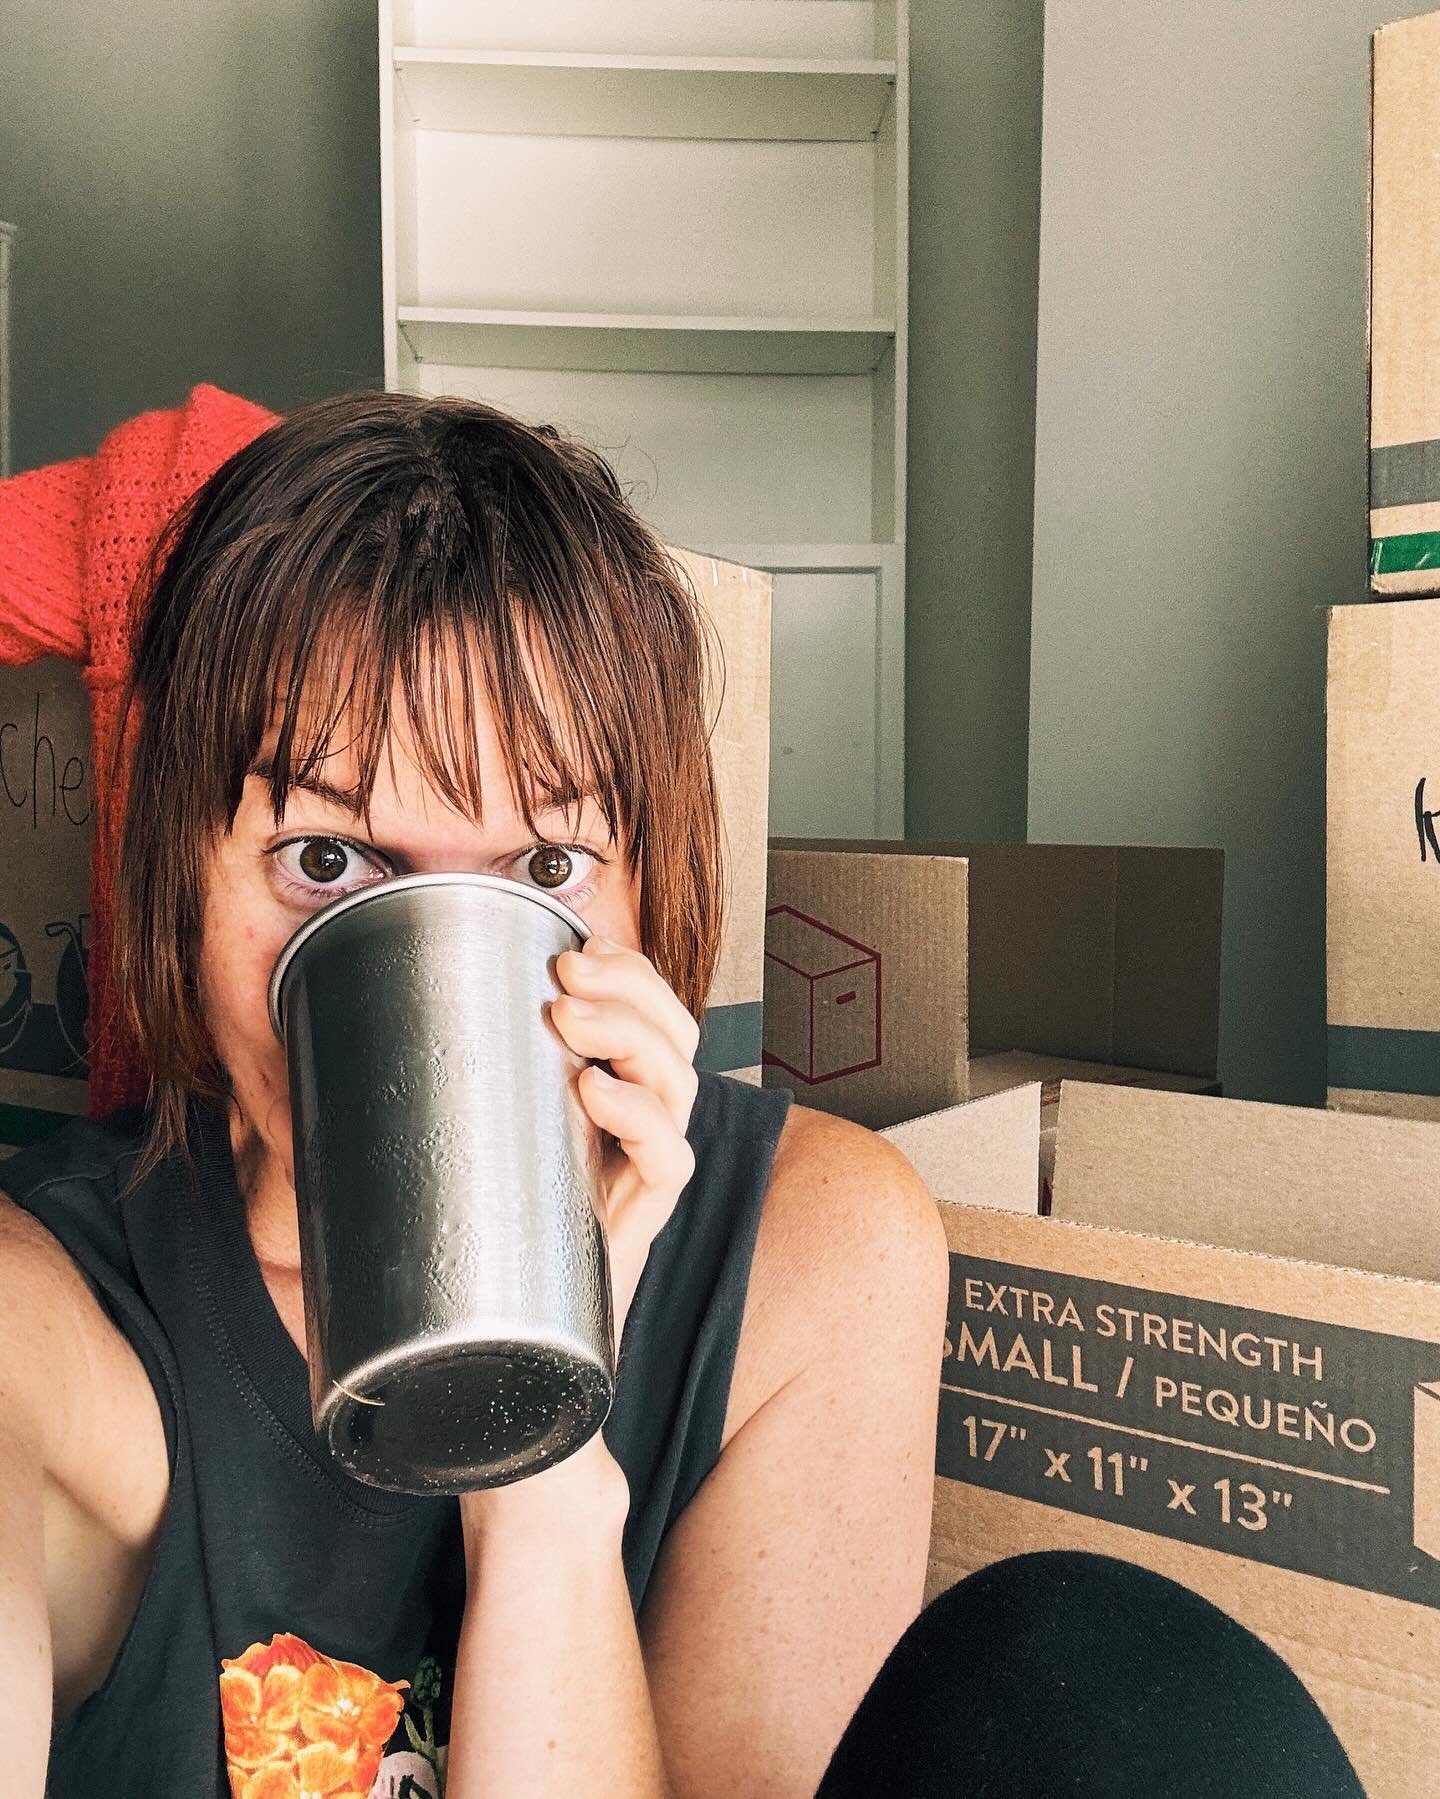 My bangs are greasy, my iced coffee watered down, and I accidentally packed boxes of things we still need. 

And I&rsquo;m releasing a book in 6-days. 

And I&rsquo;m pretty sure my kids read my anxiety as a green light to start repeating everything 